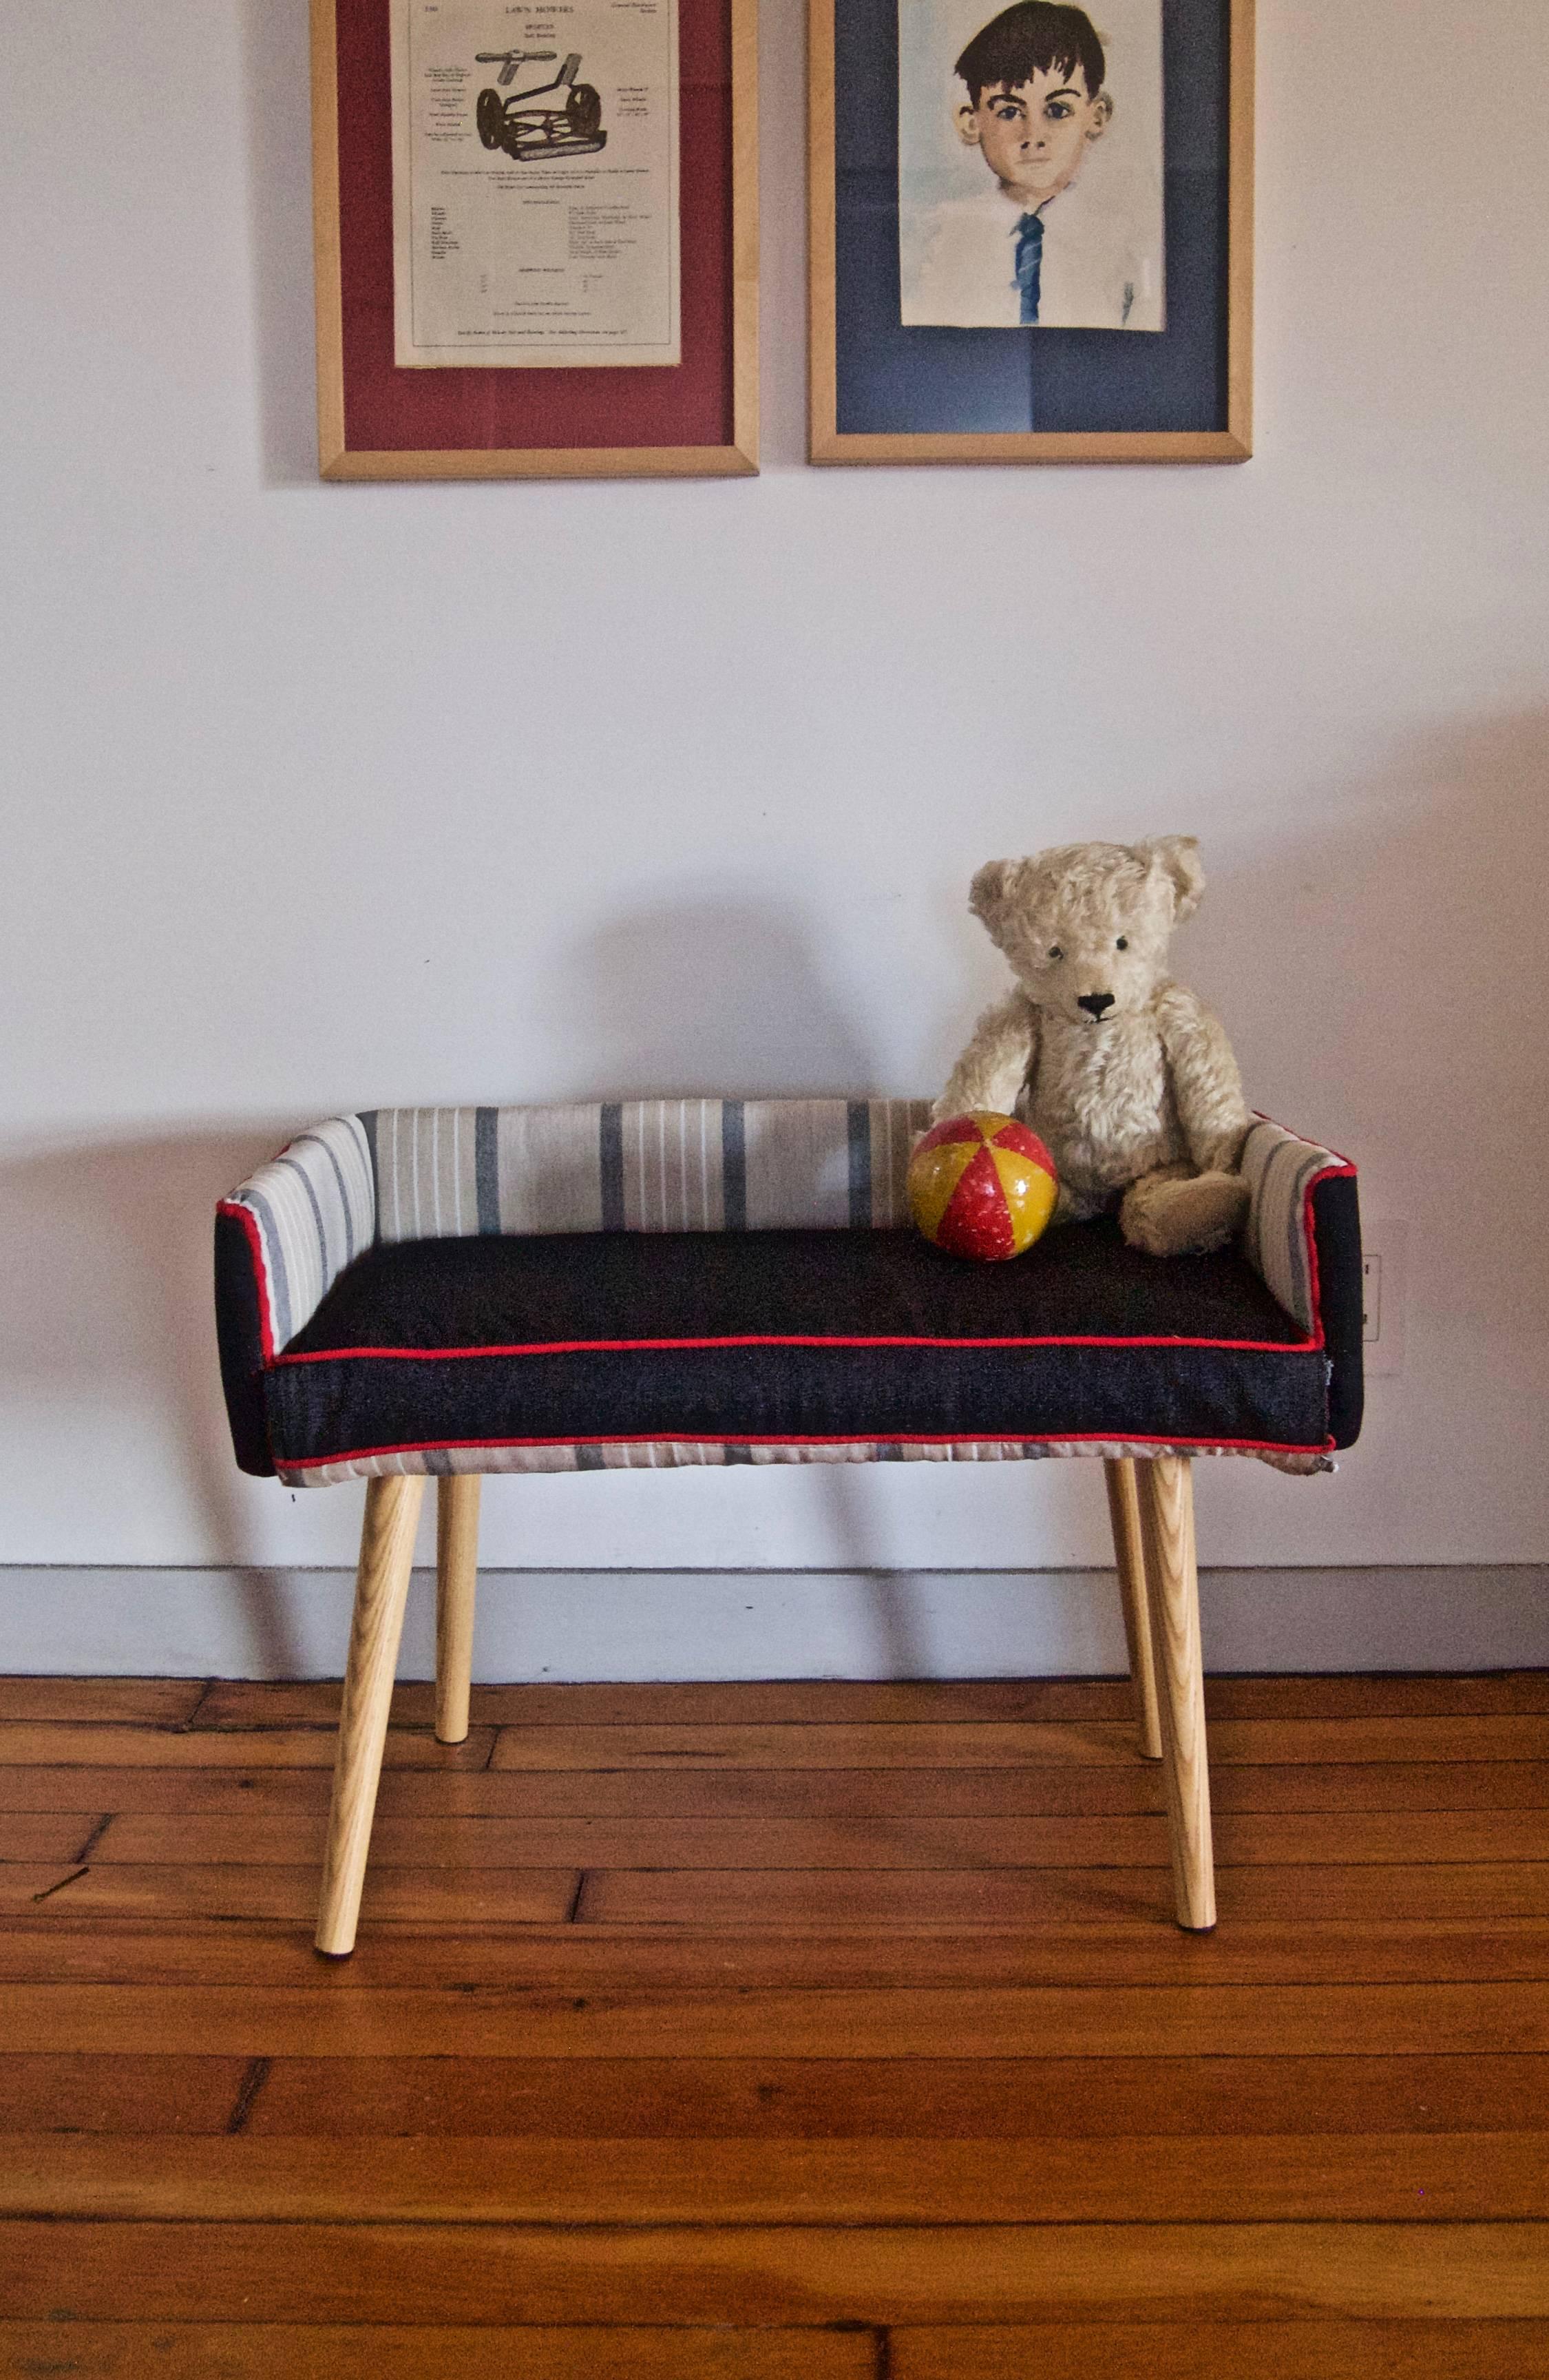 A stylish midcentury style, kid-sized stool or sofa for your child's room! 

This handmade seat is 26